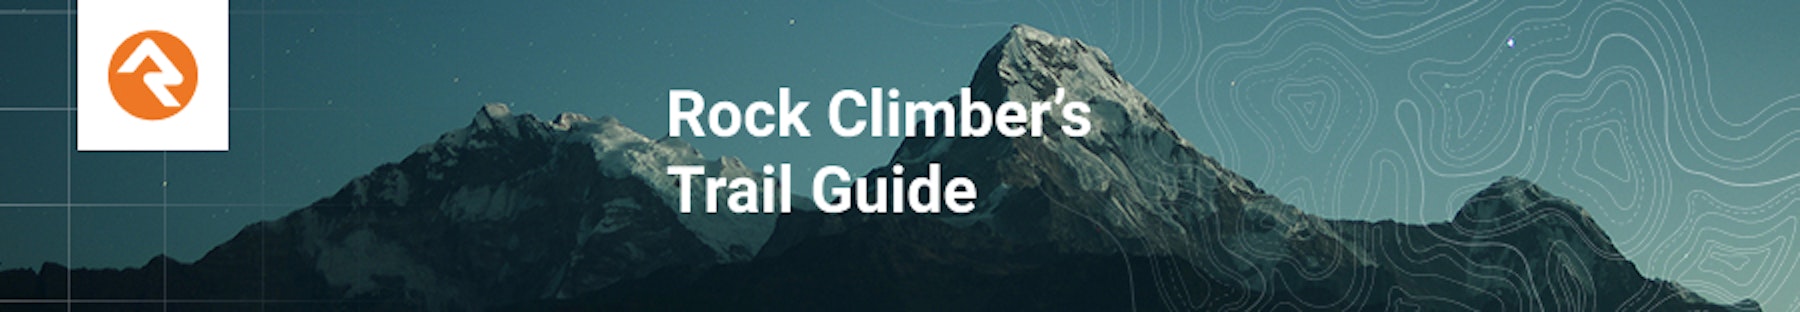 The Rock Climber’s Trail Guide: Milepost 1